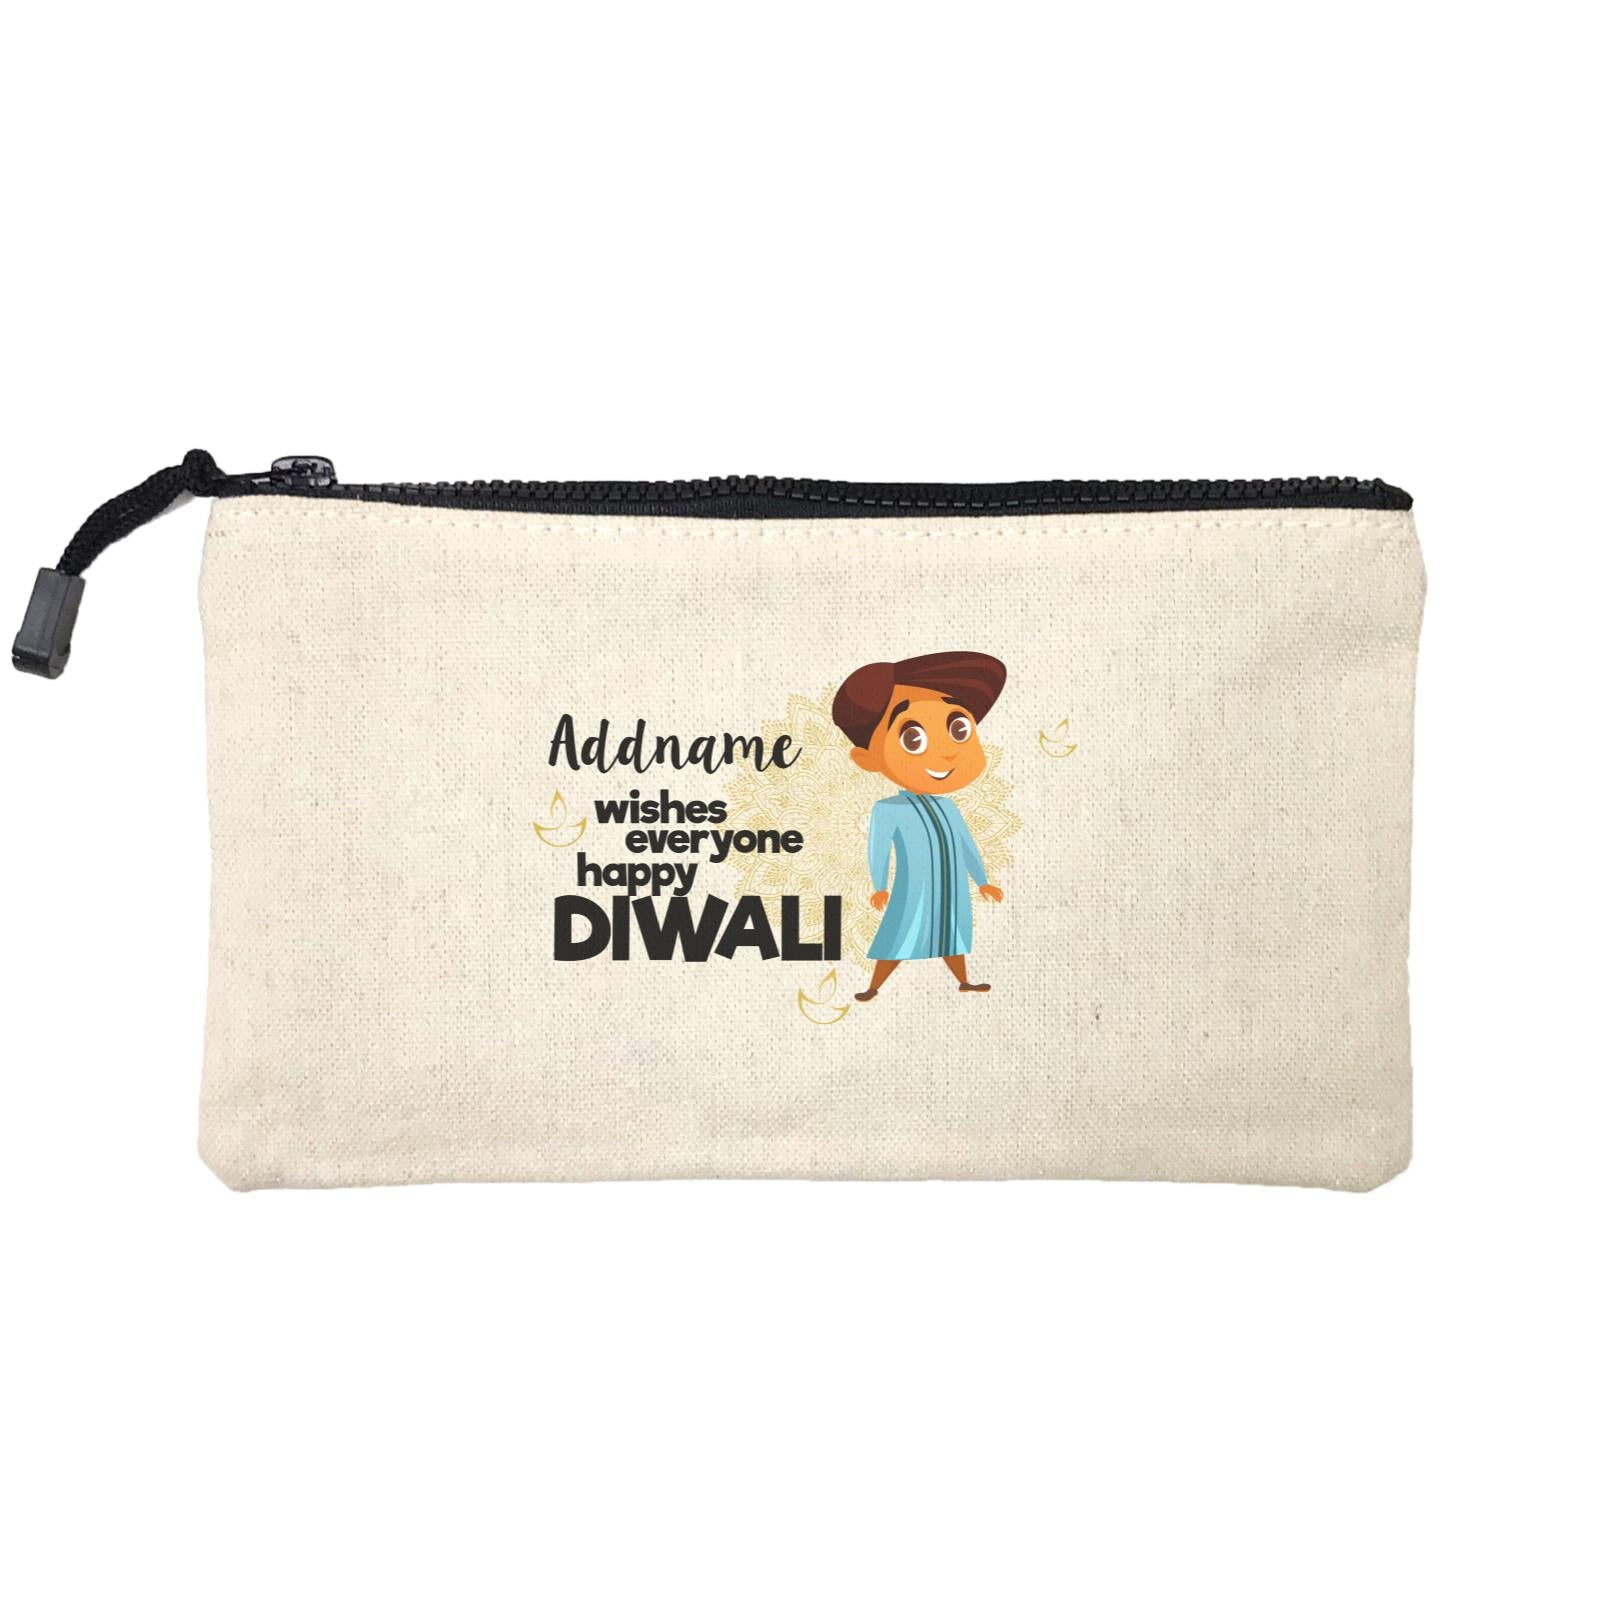 Cute Boy Wishes Everyone Happy Diwali Addname Mini Accessories Stationery Pouch